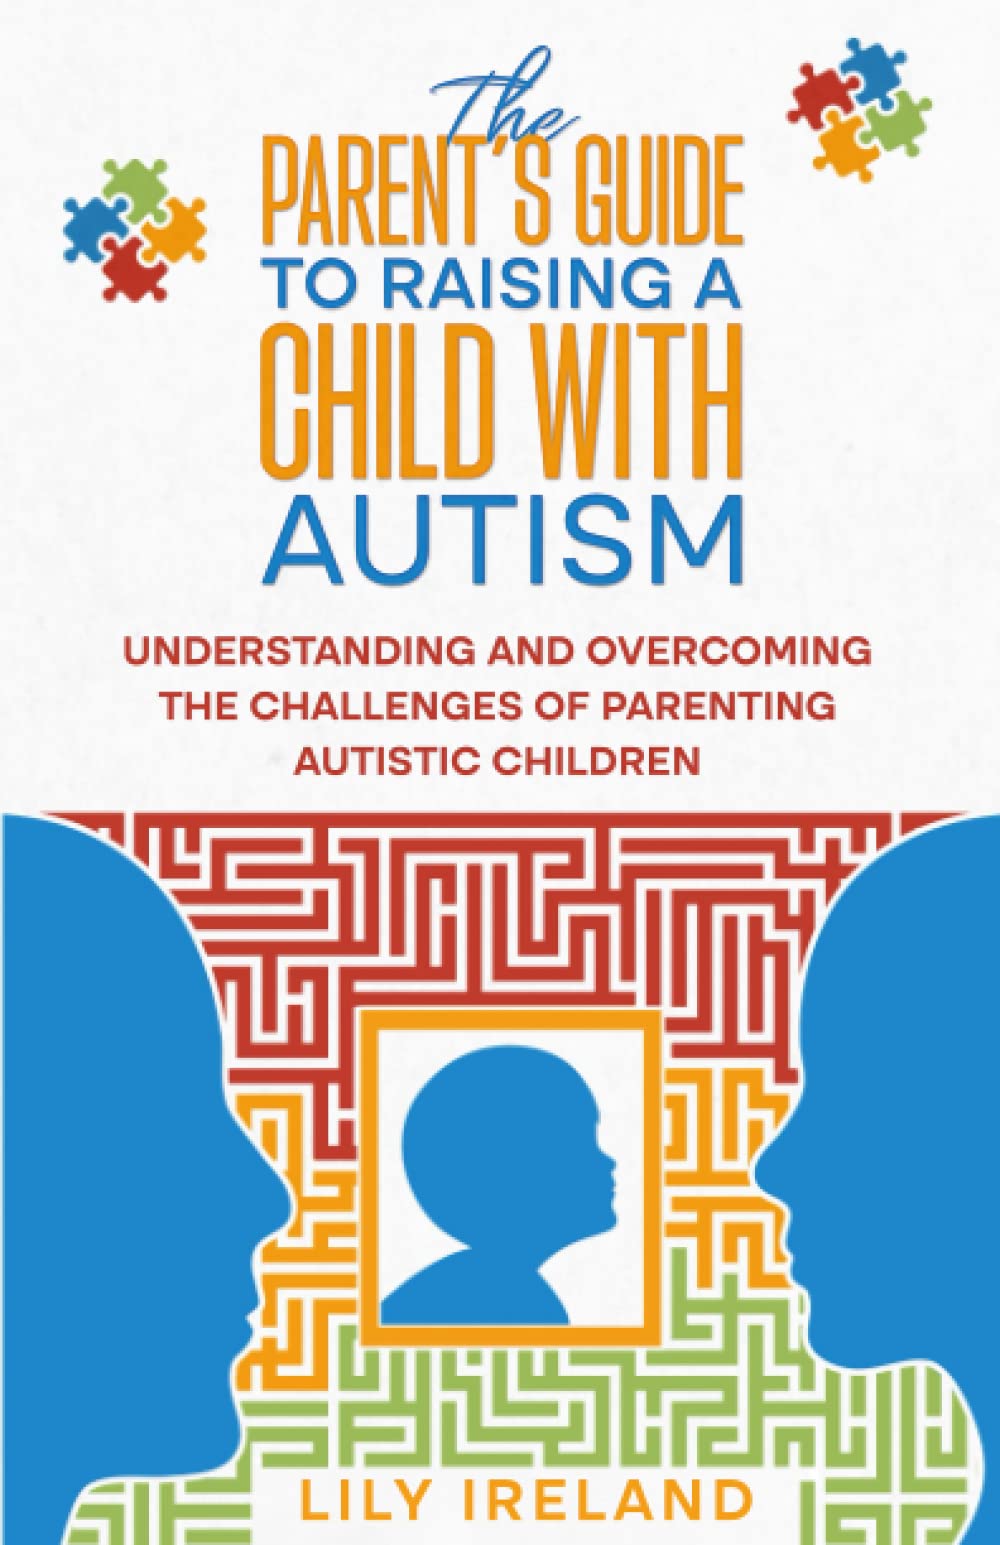 The Parent’s Guide to Raising a Child With Autism: Understanding and Overcoming the Challenges of Parenting Autistic Children